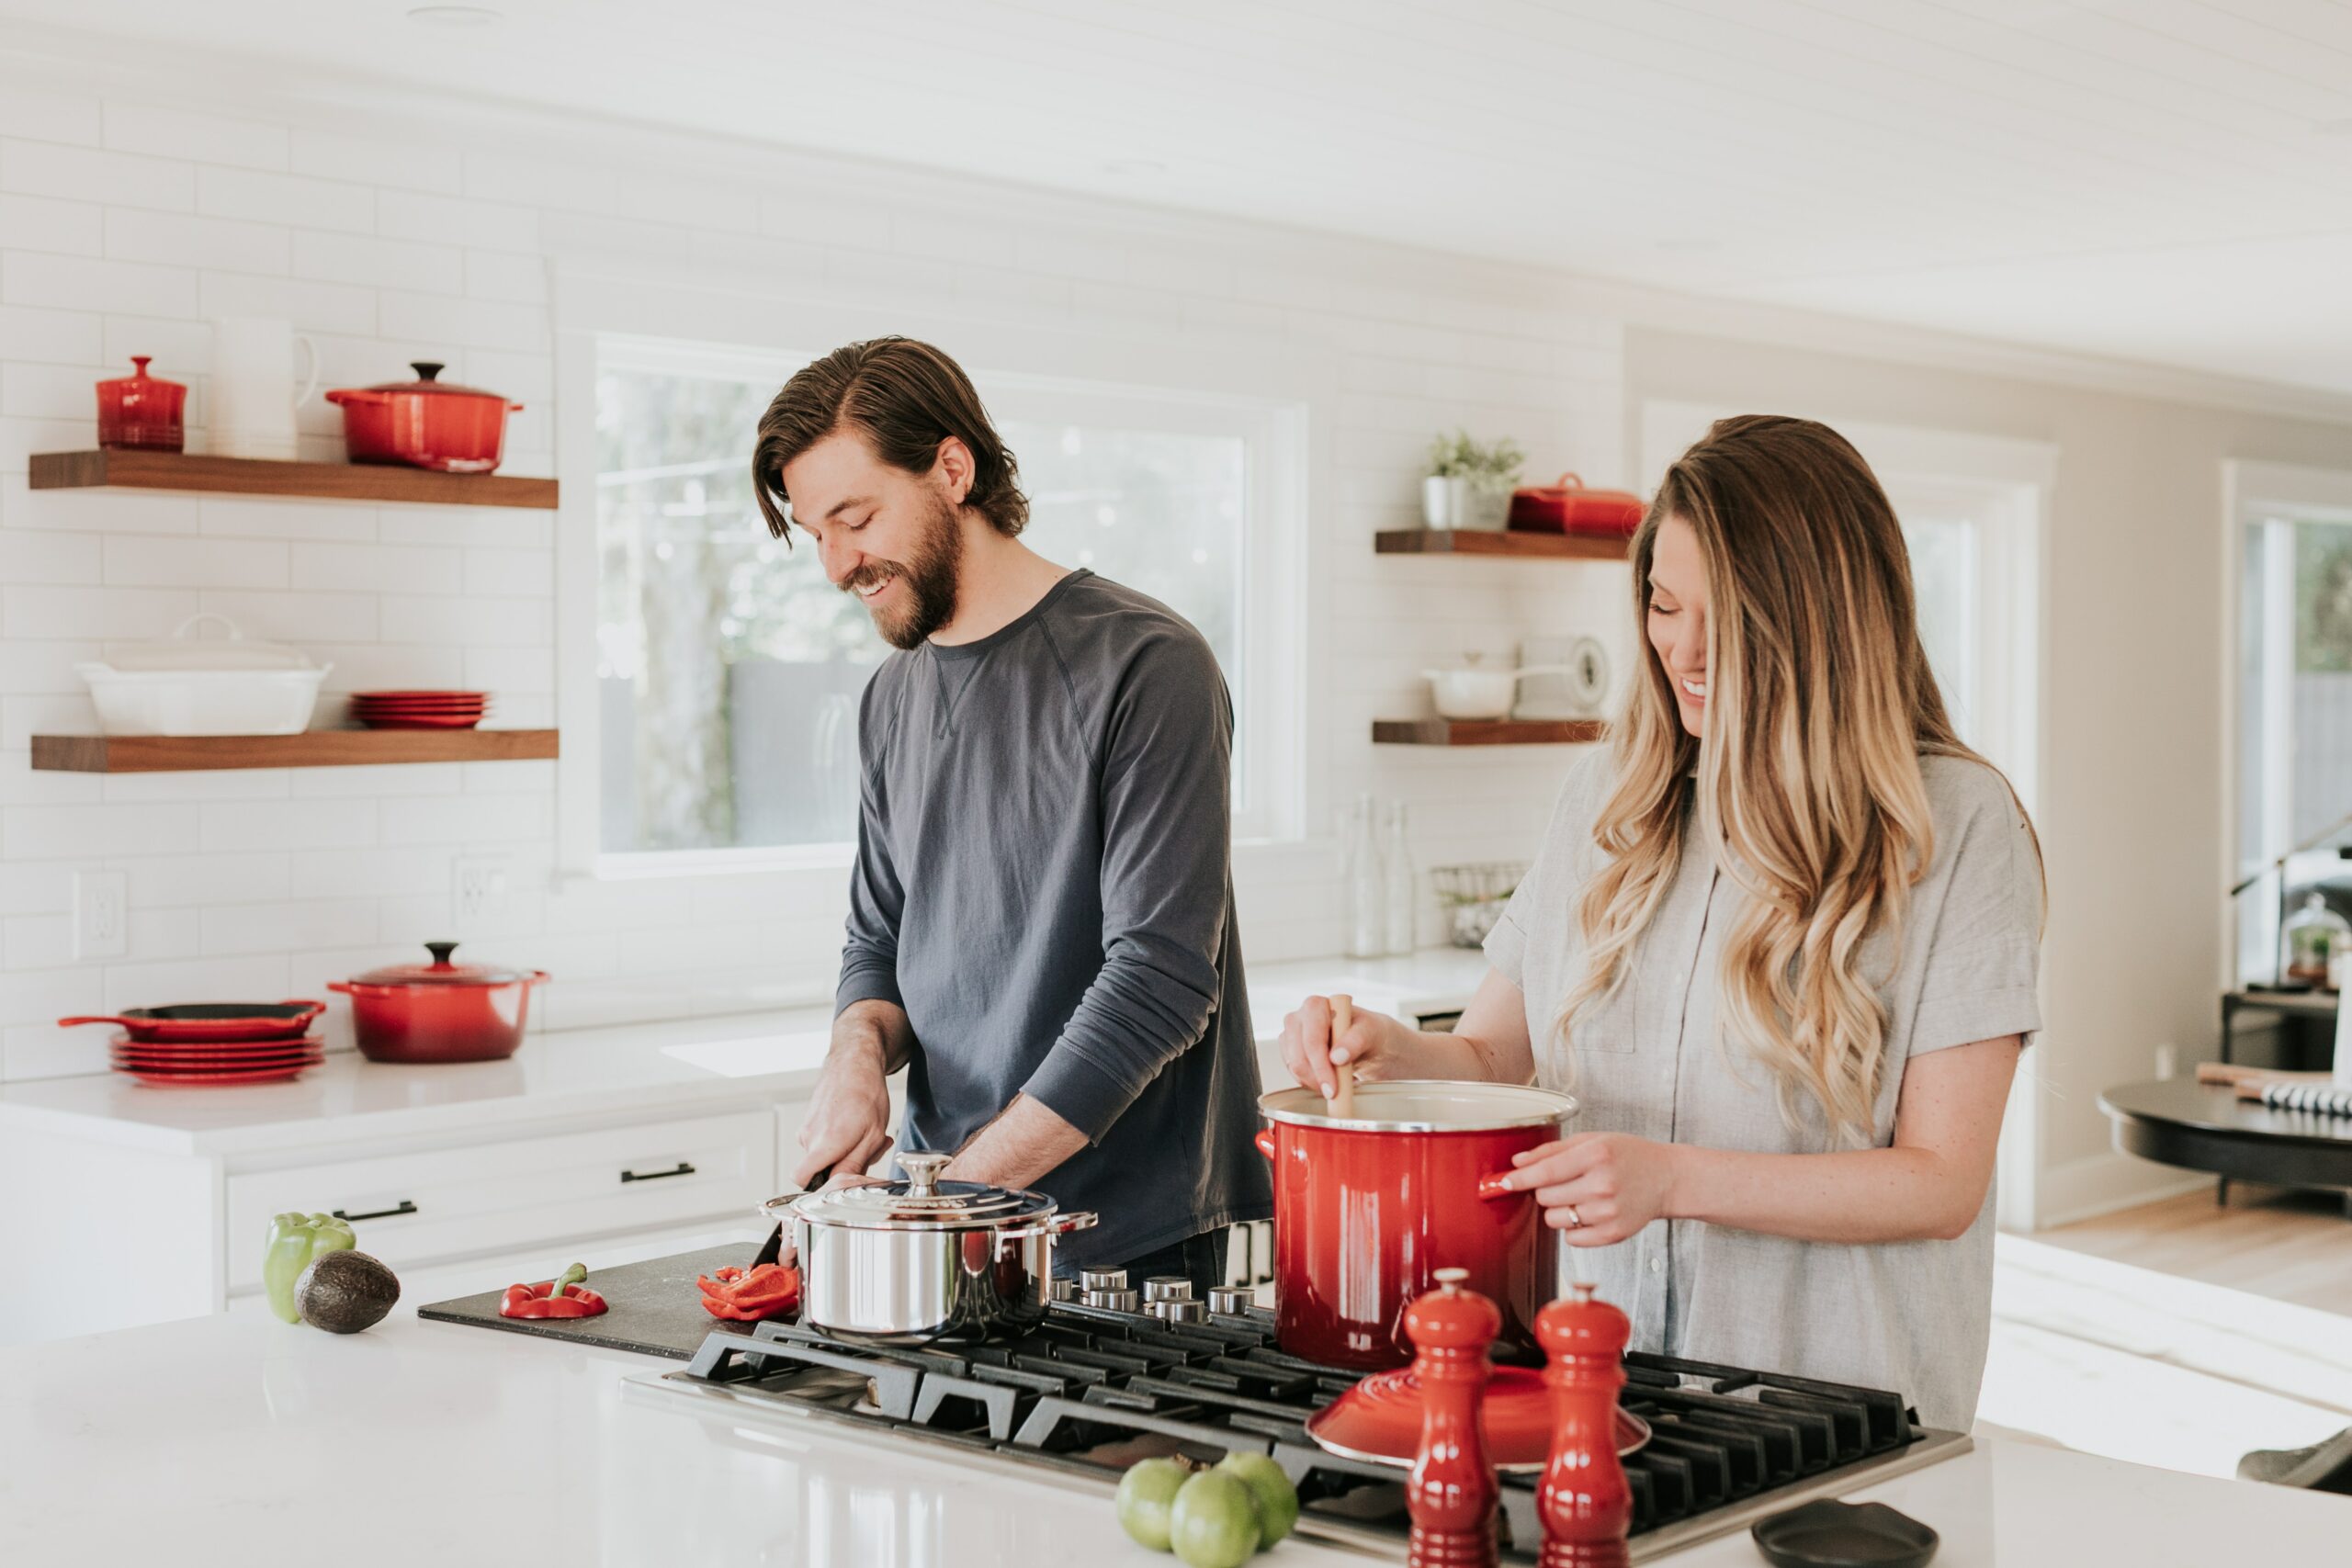 Young male and female standing cooking at stove top. Colour scheme of kitchen and crockery is red and white, pots on stove are red and chrome.